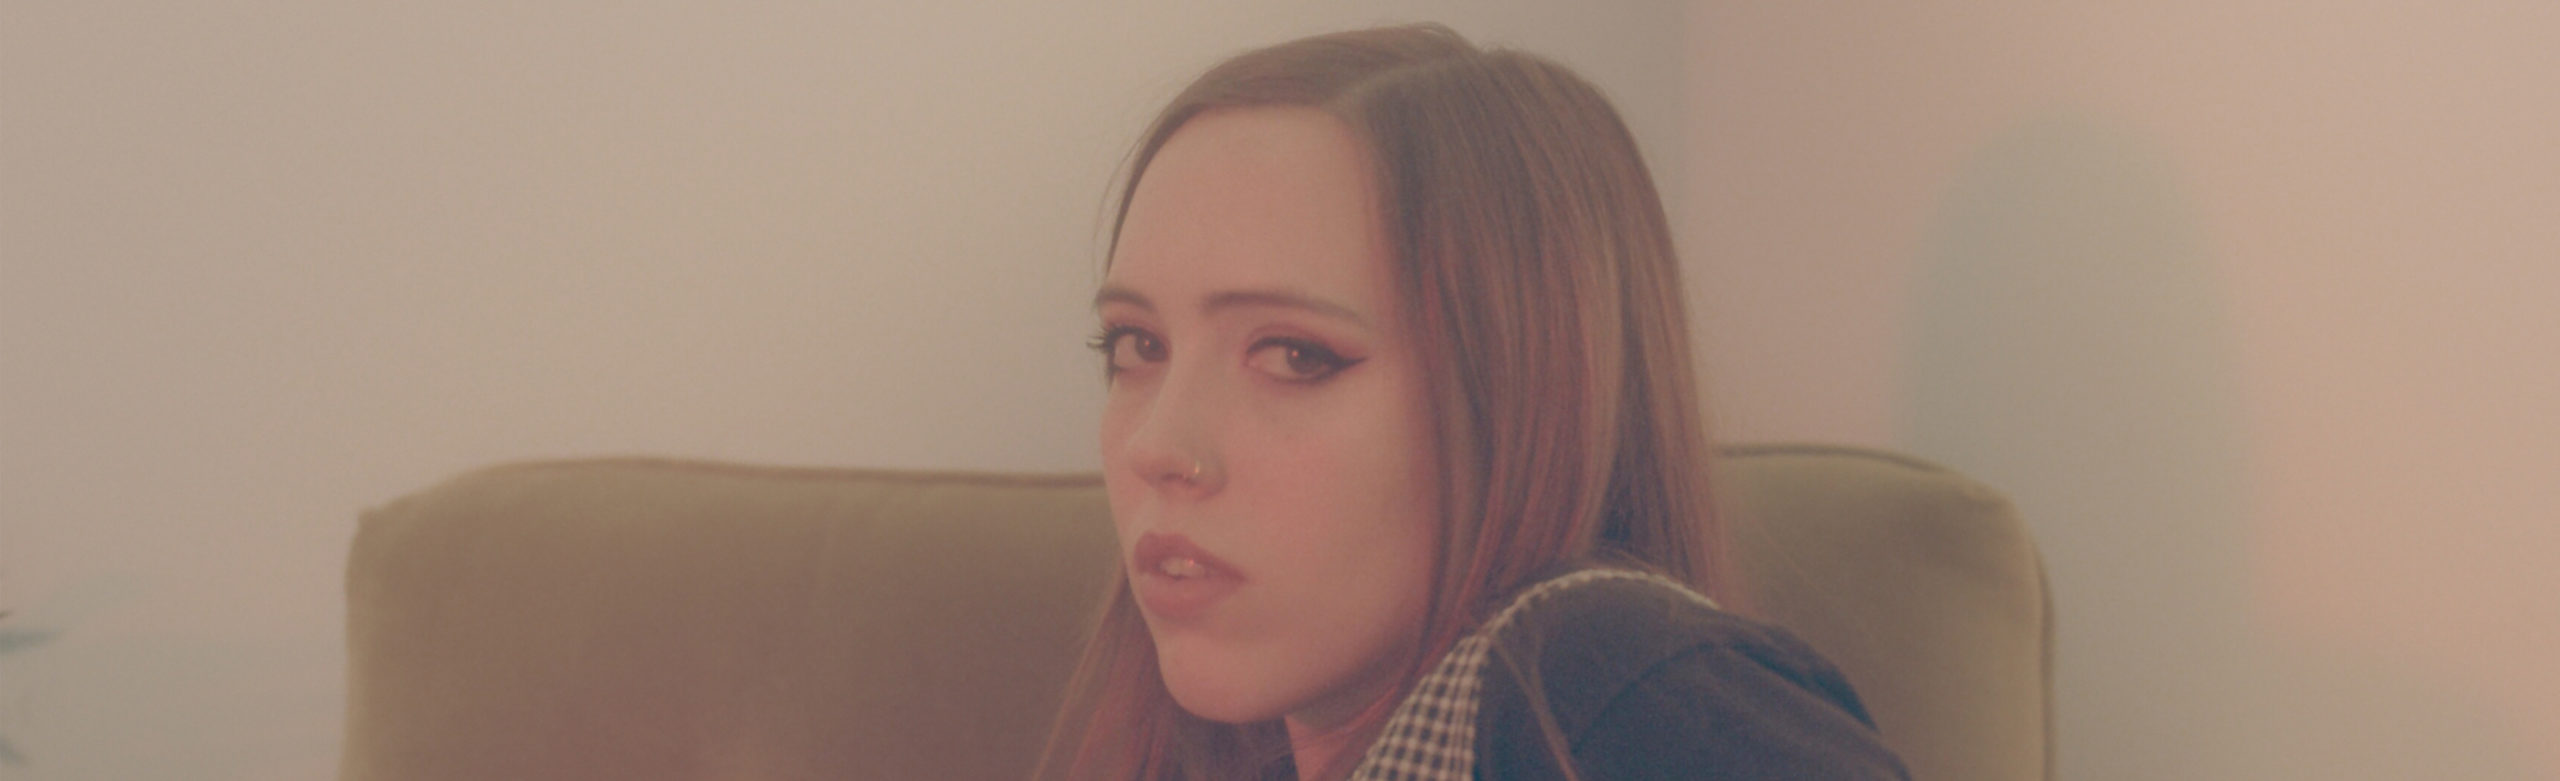 Soccer Mommy Tickets + Logjam Merchandise Giveaway Image